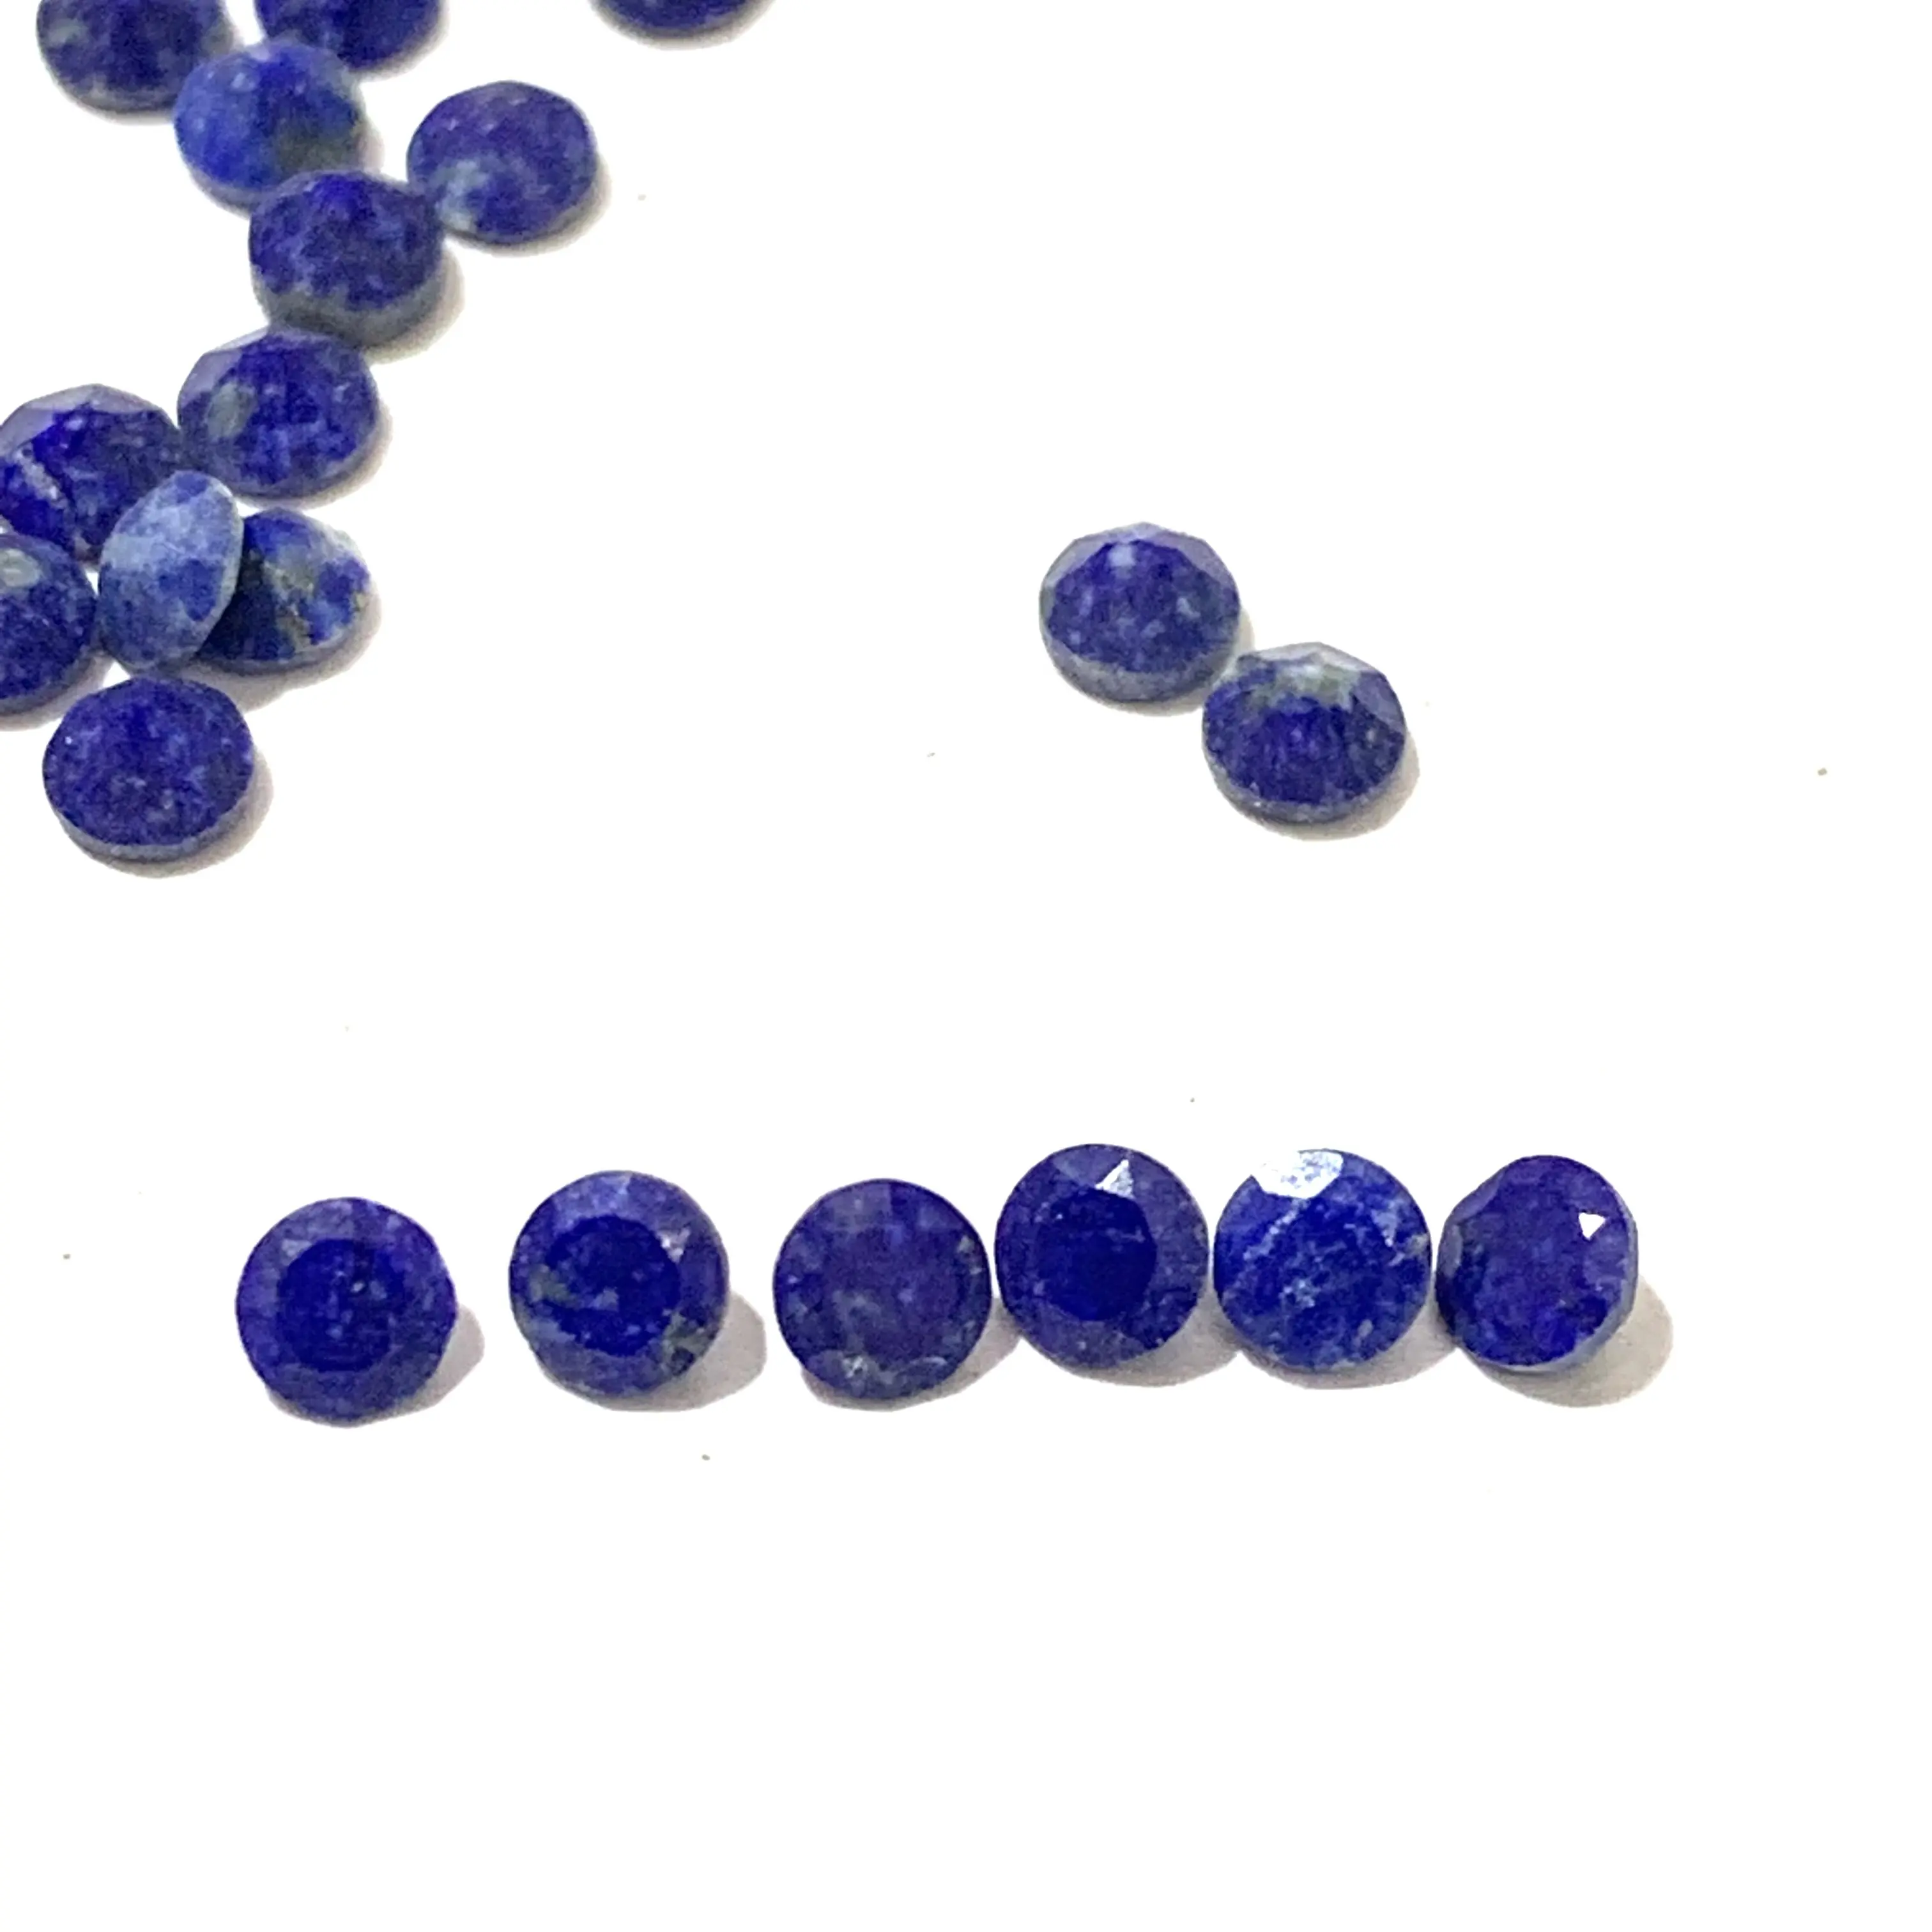 2mm Small Round Cut Faceted Loose Gemstones Lapis